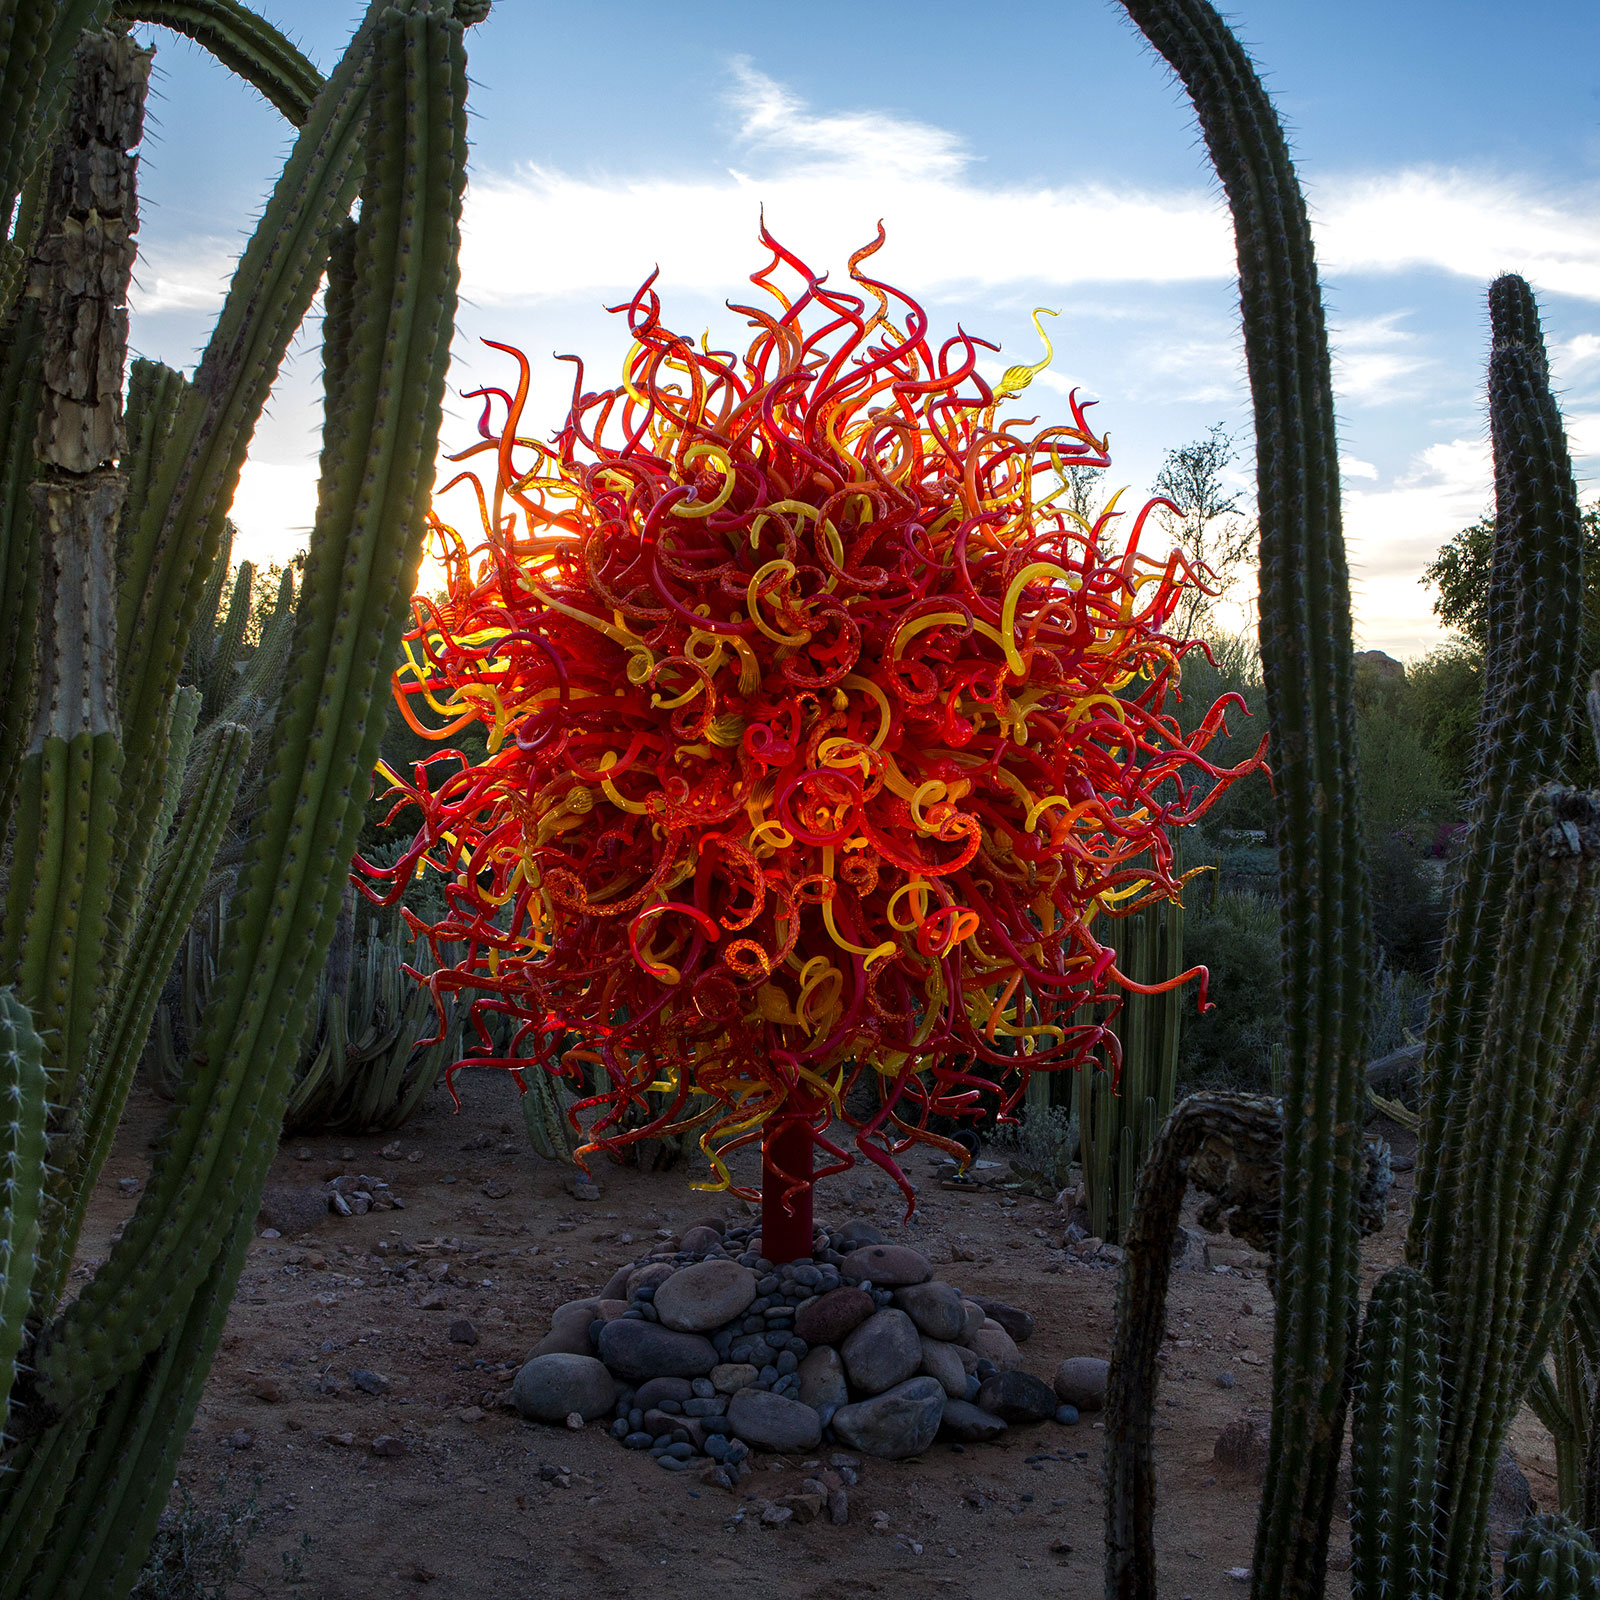 Summer Sun, 2010 by Dale Chihuly